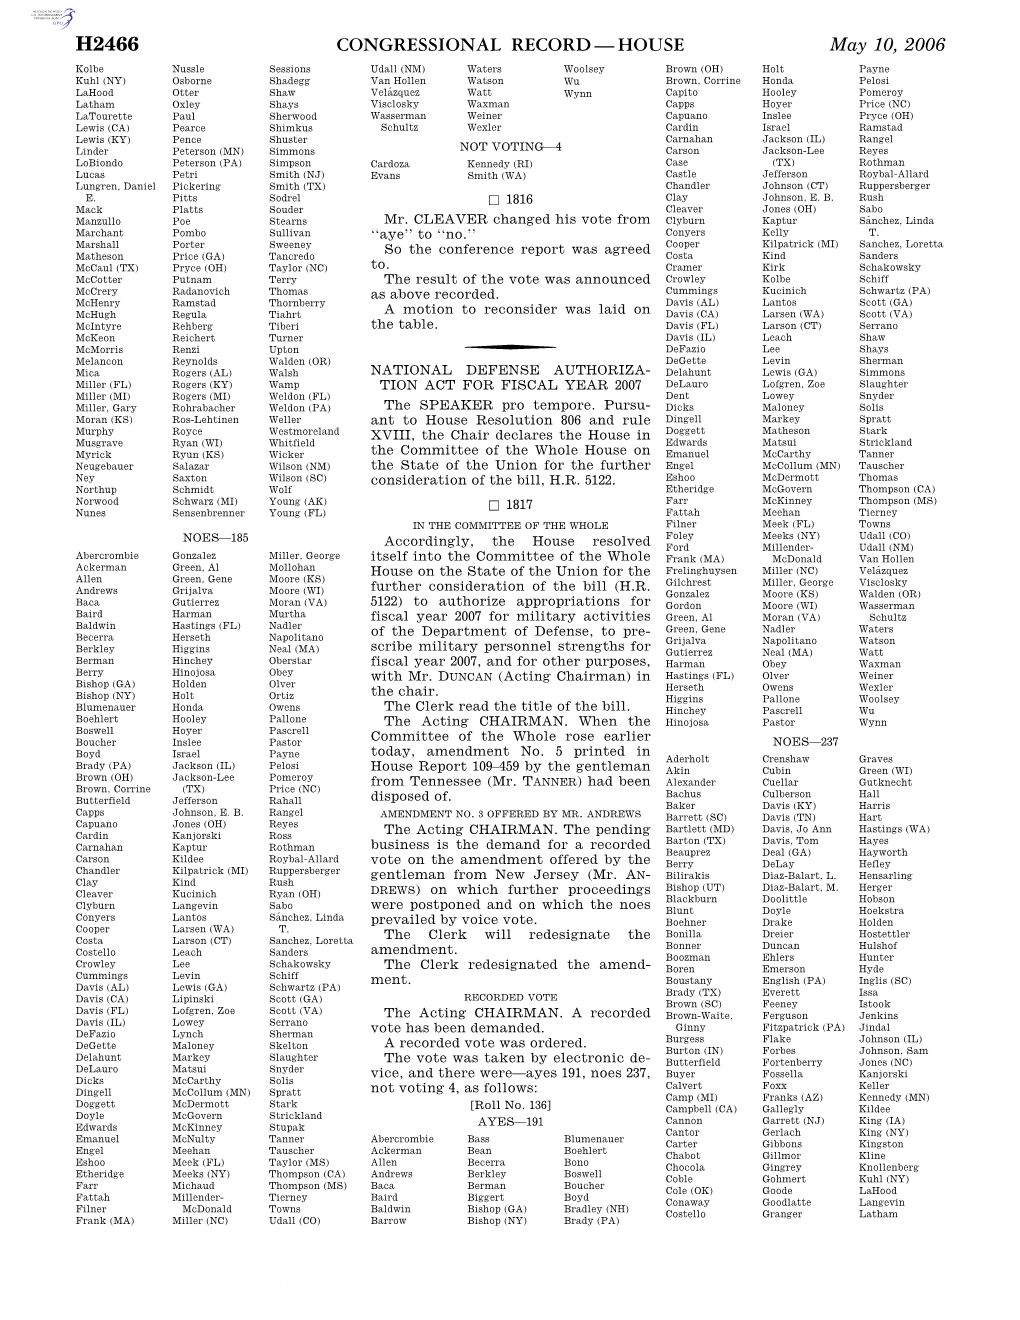 Congressional Record—House H2466